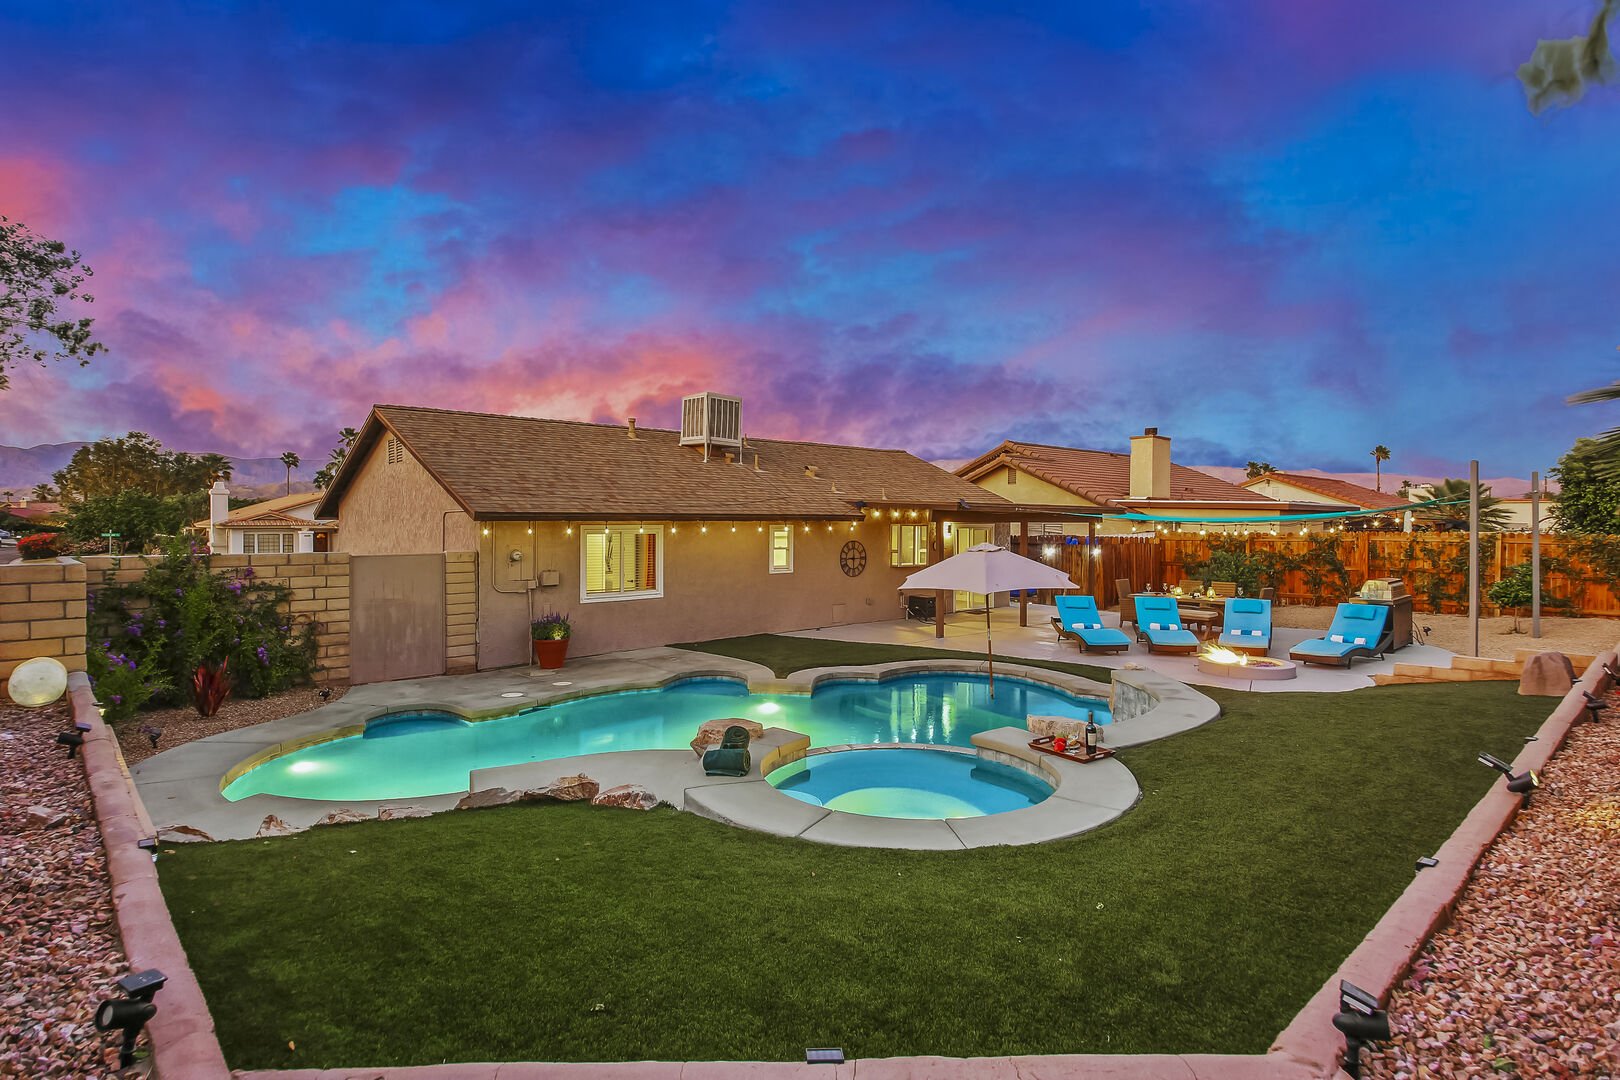 Treat yourself to the perfect vacation rental close to the Coachella Valley Music Festival and polo grounds.